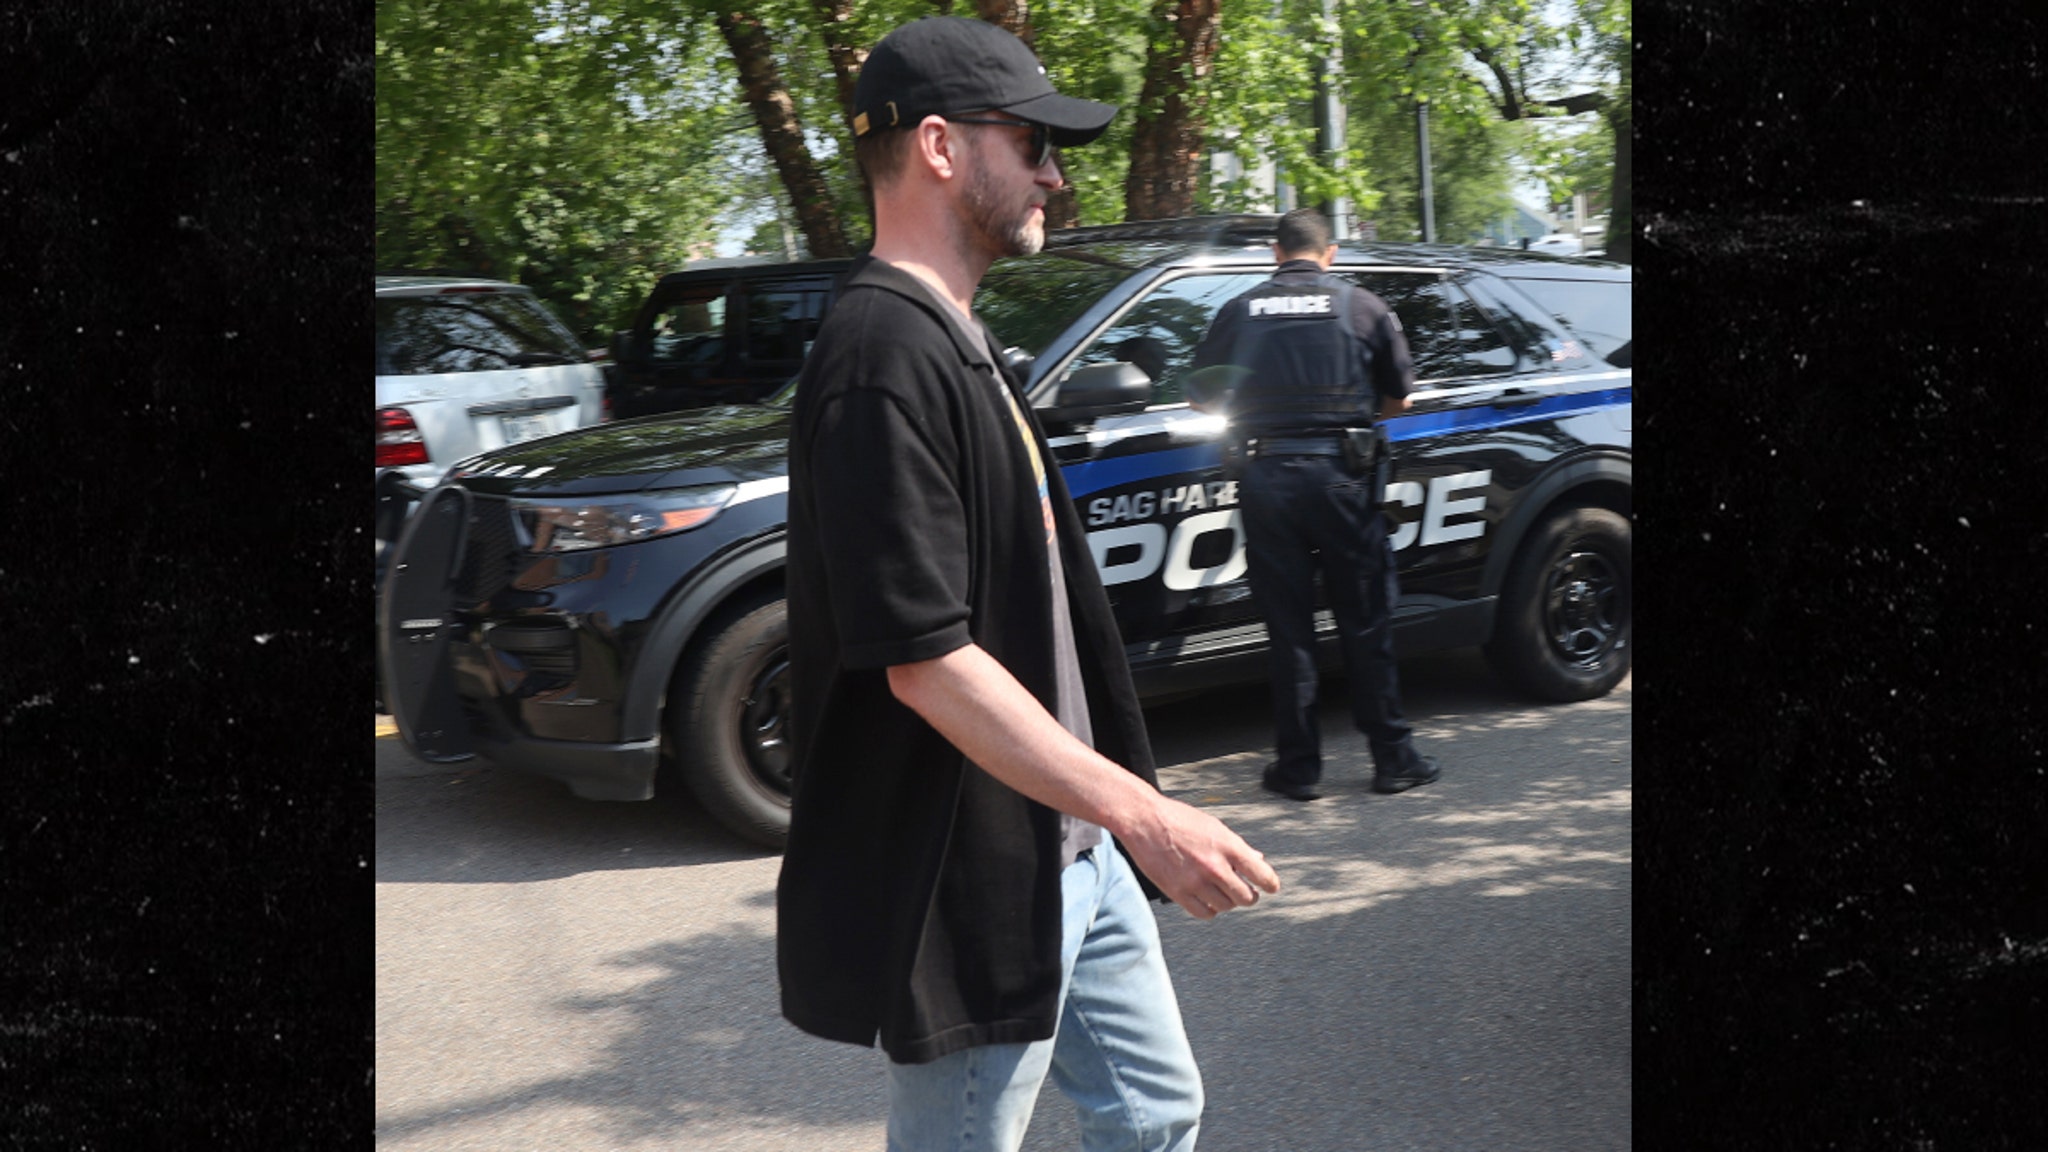 Justin Timberlake Arrested in New York for DWI, New Photos of Jail Release